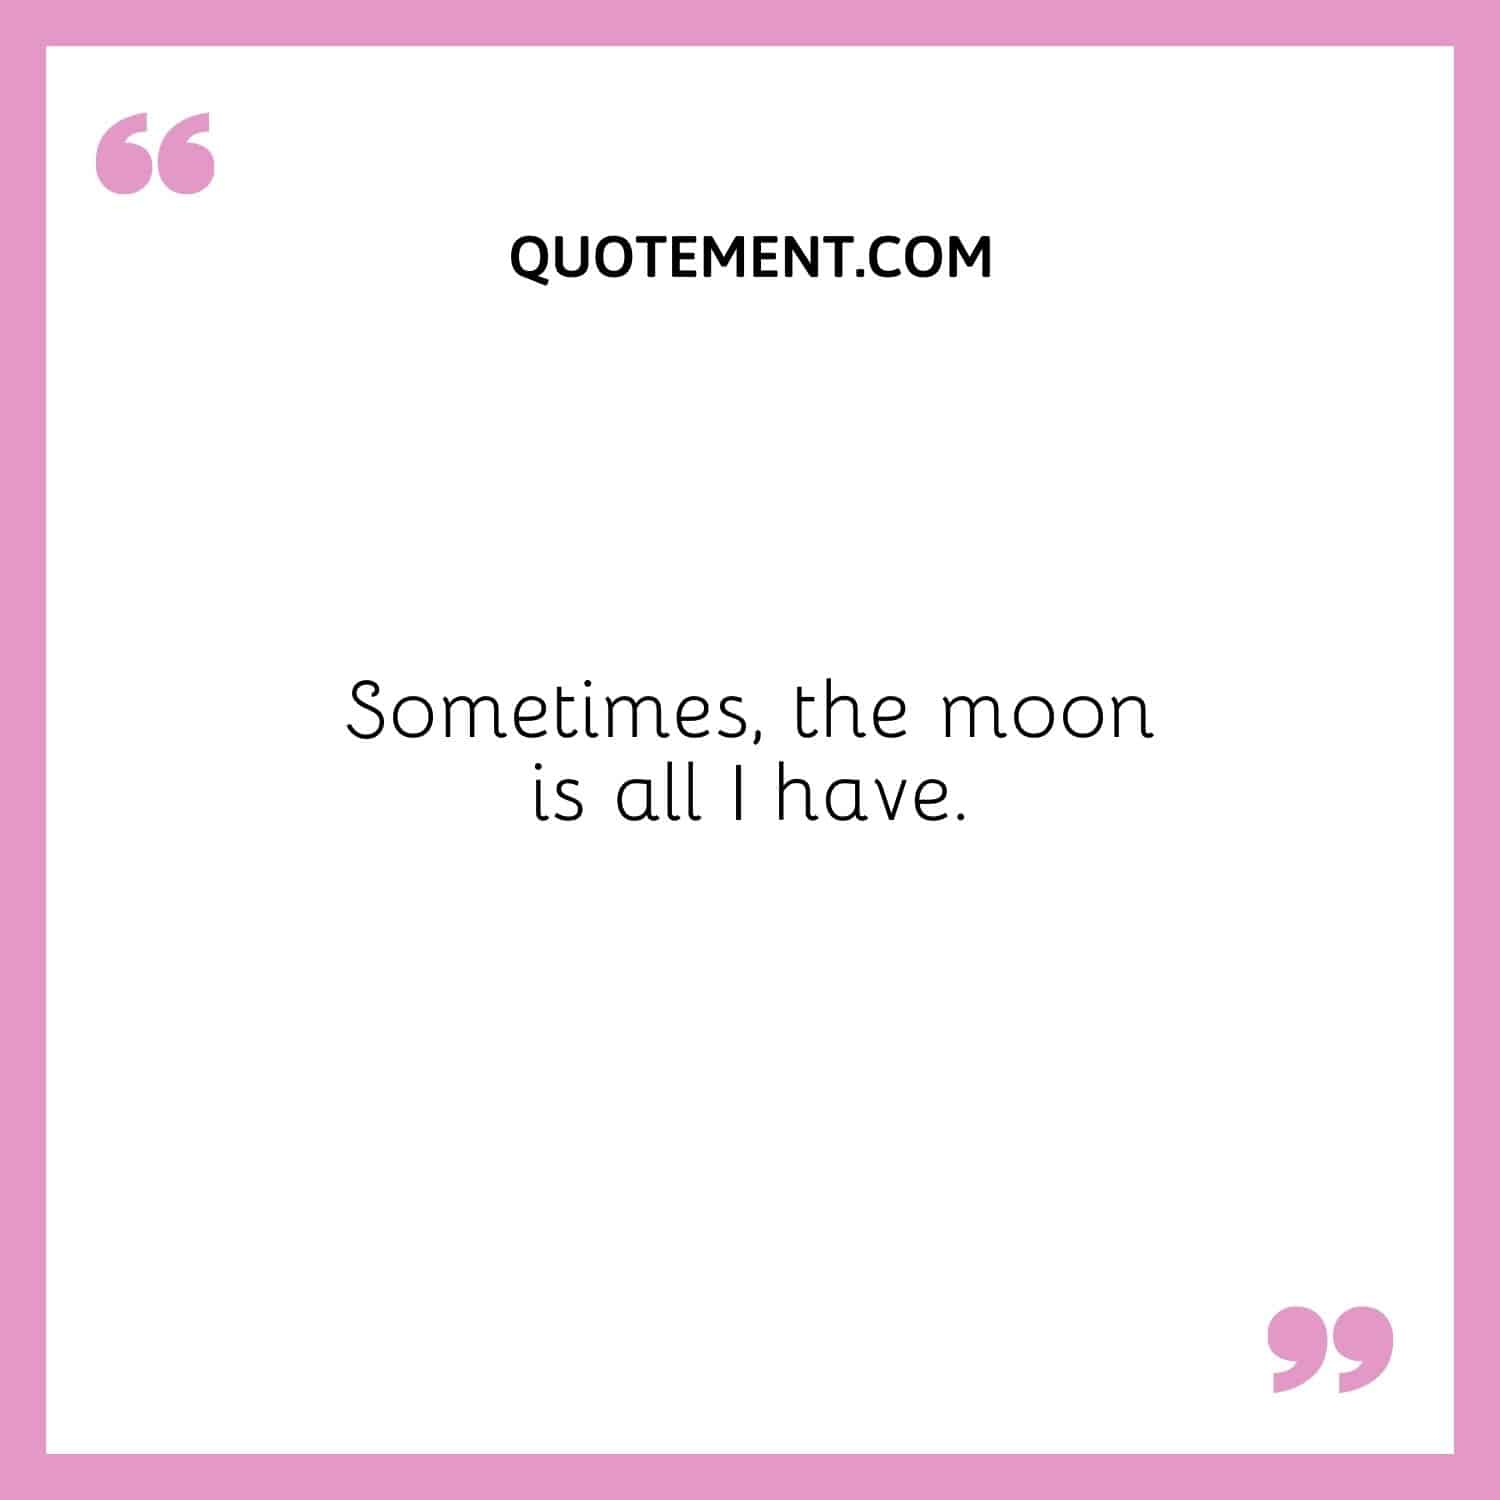 Sometimes, the moon is all I have.